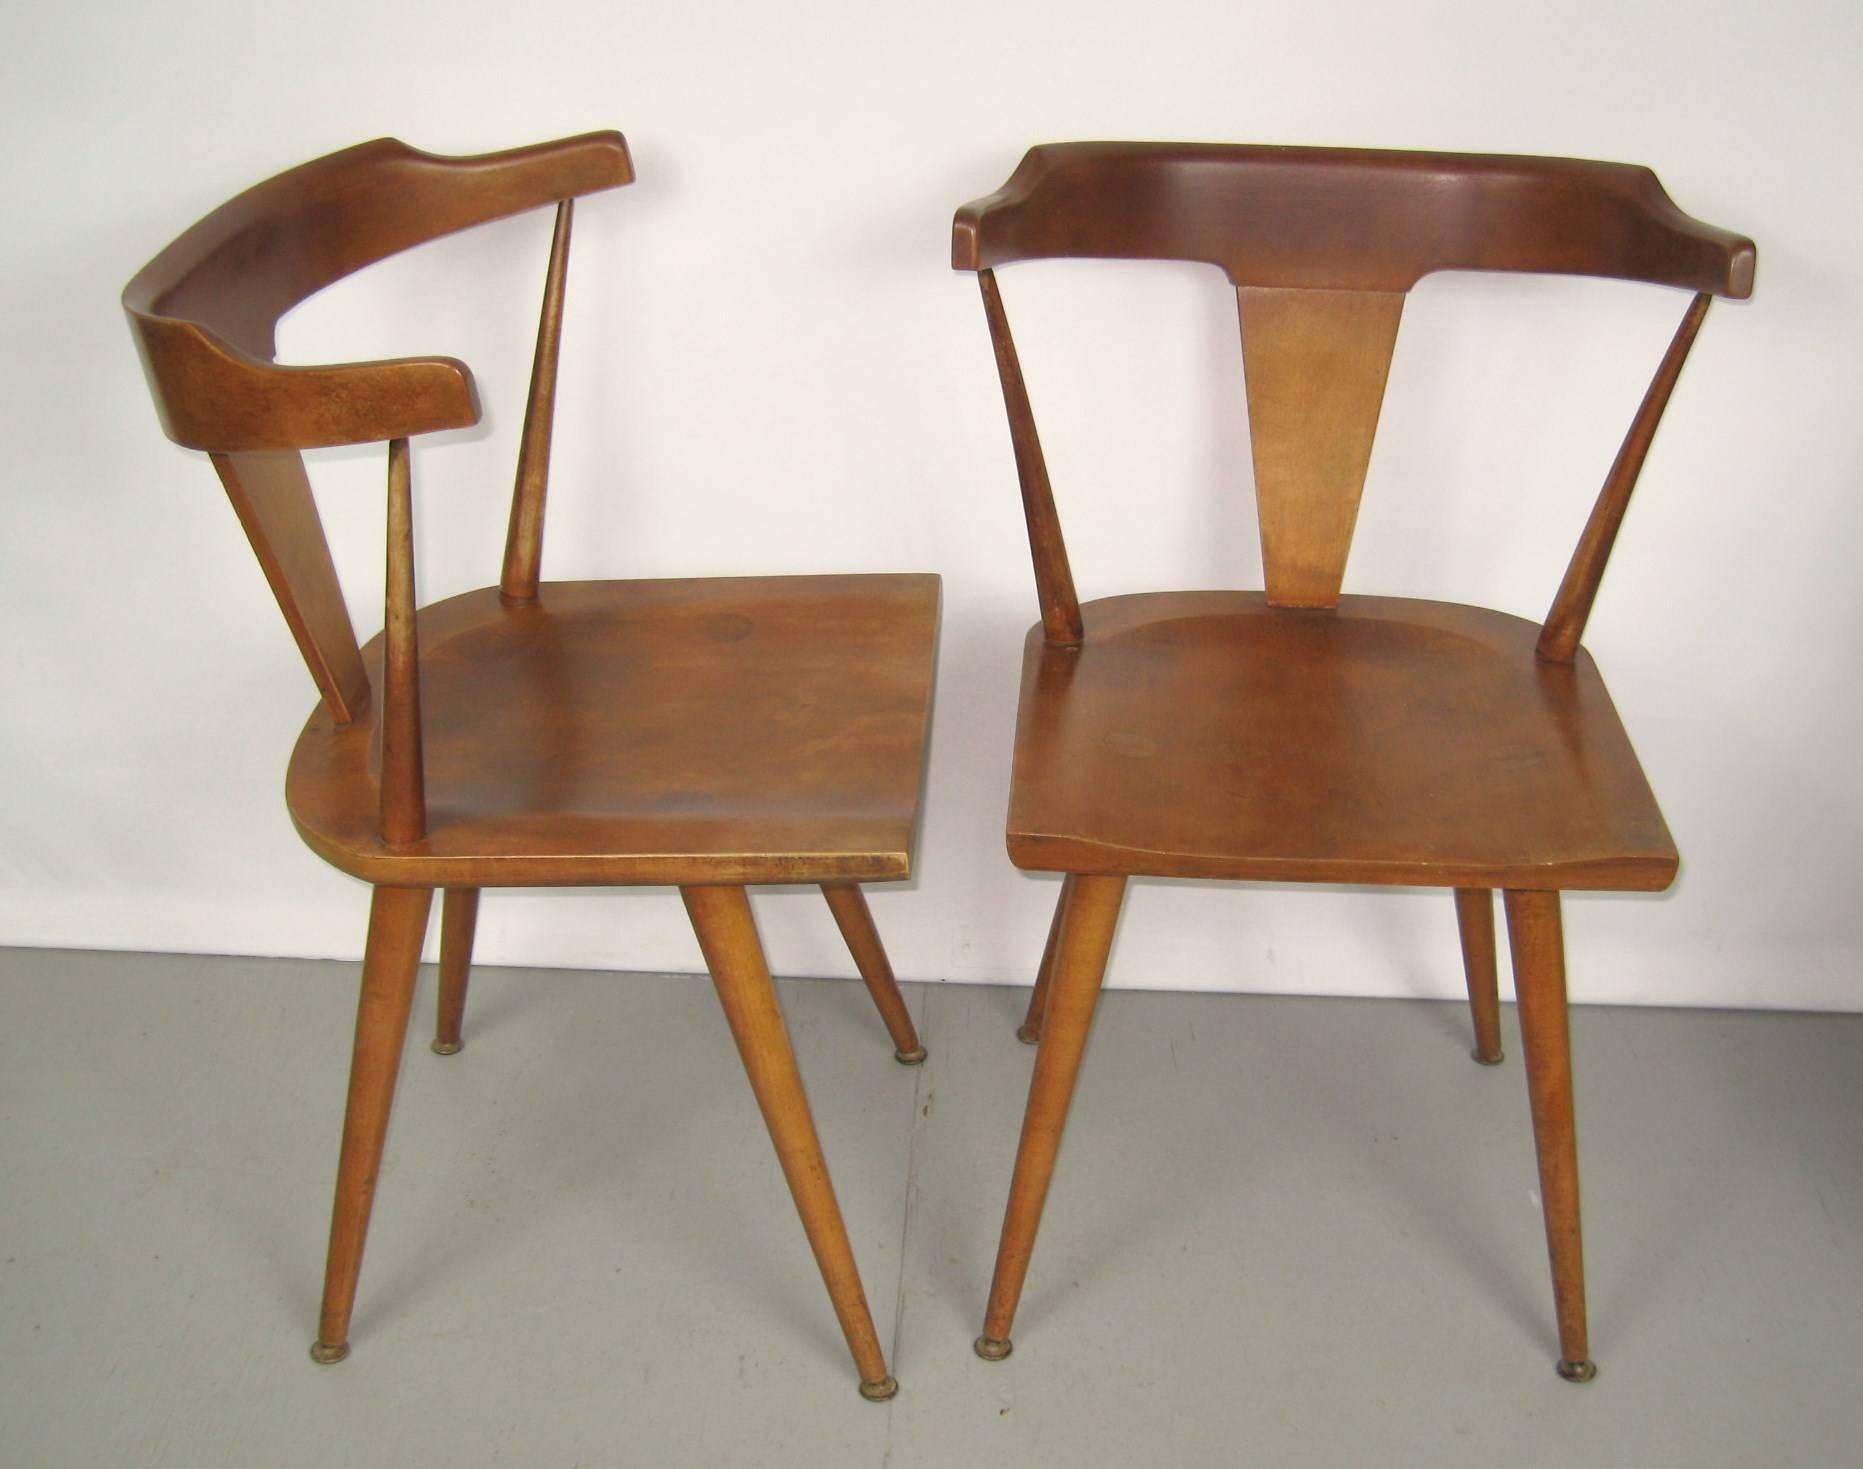 Paul McCobb Planner Group for Winchendon chairs,
circa 1950s, 
Measures: 31